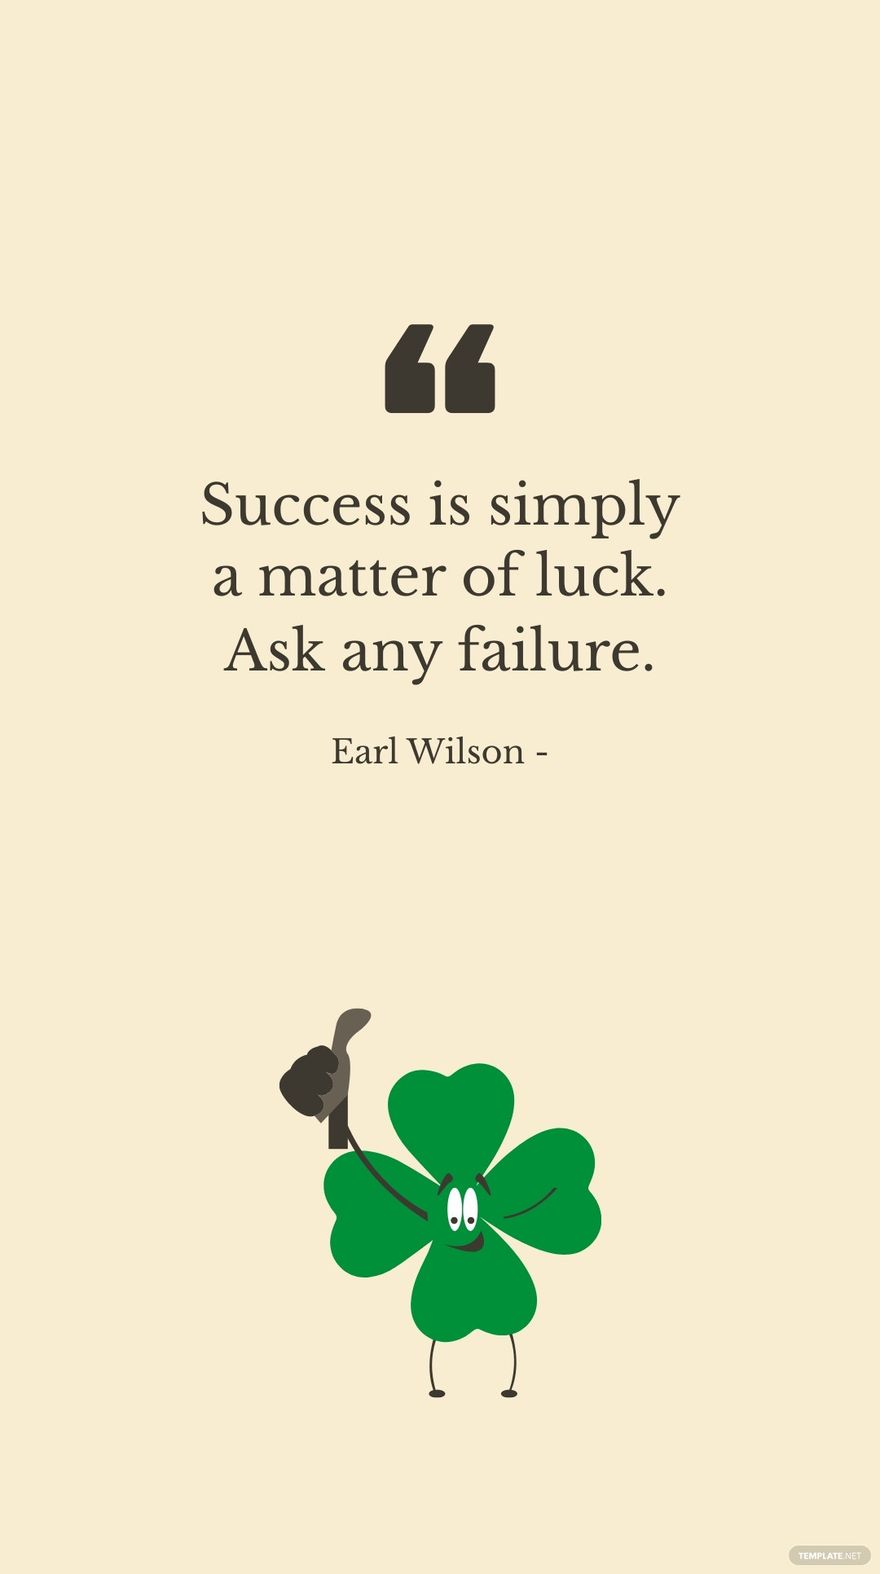 Earl Wilson - Success is simply a matter of luck. Ask any failure. in JPG